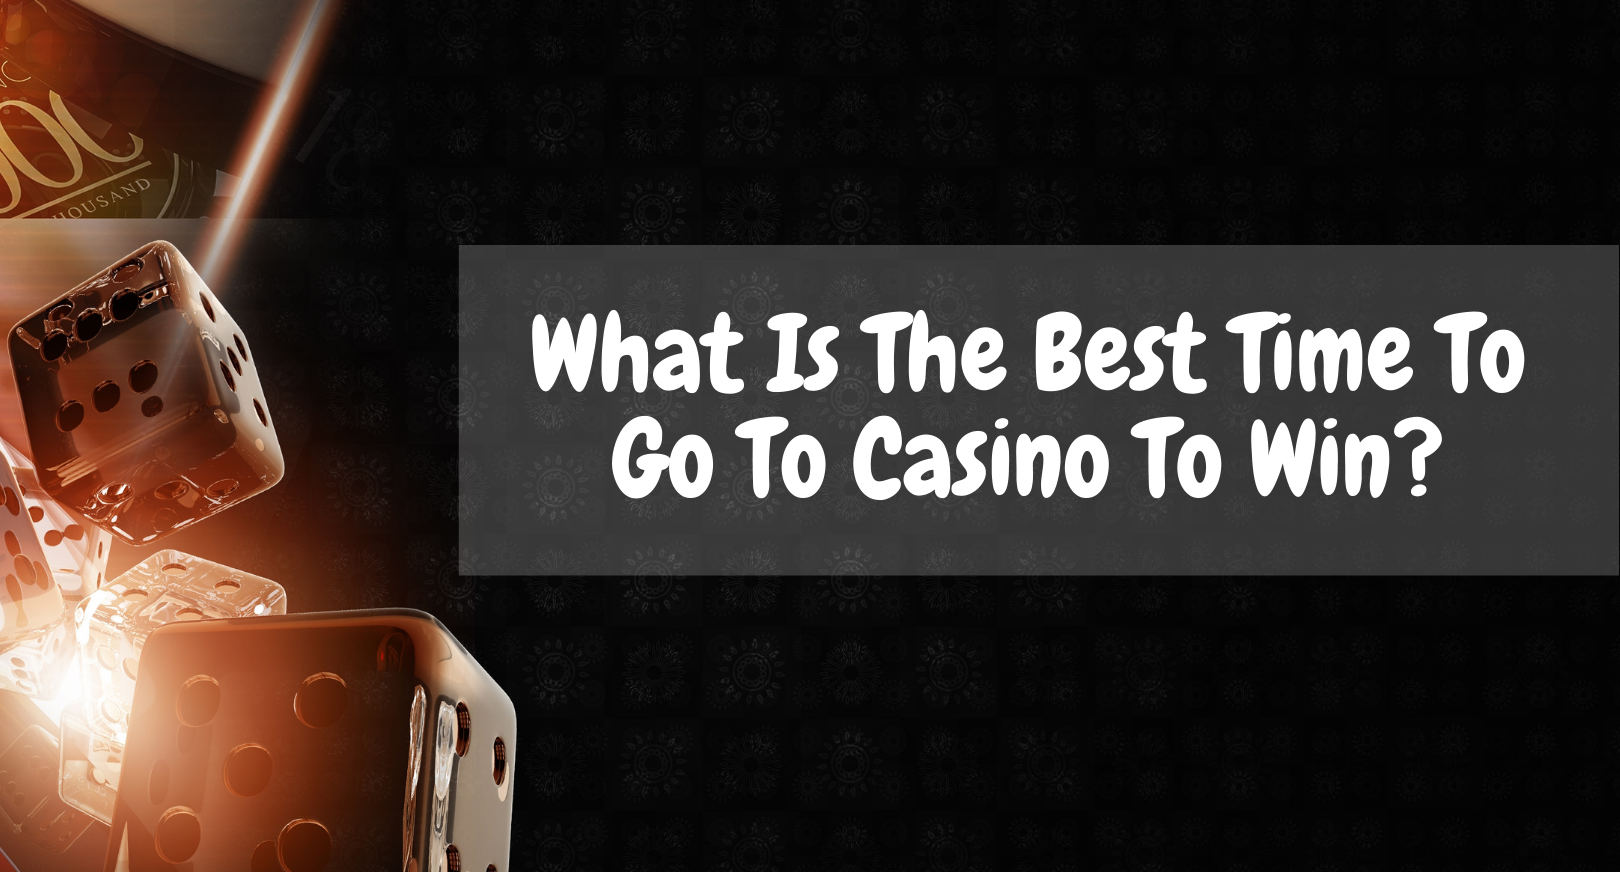 What Is The Best Time To Go To Casino To Win